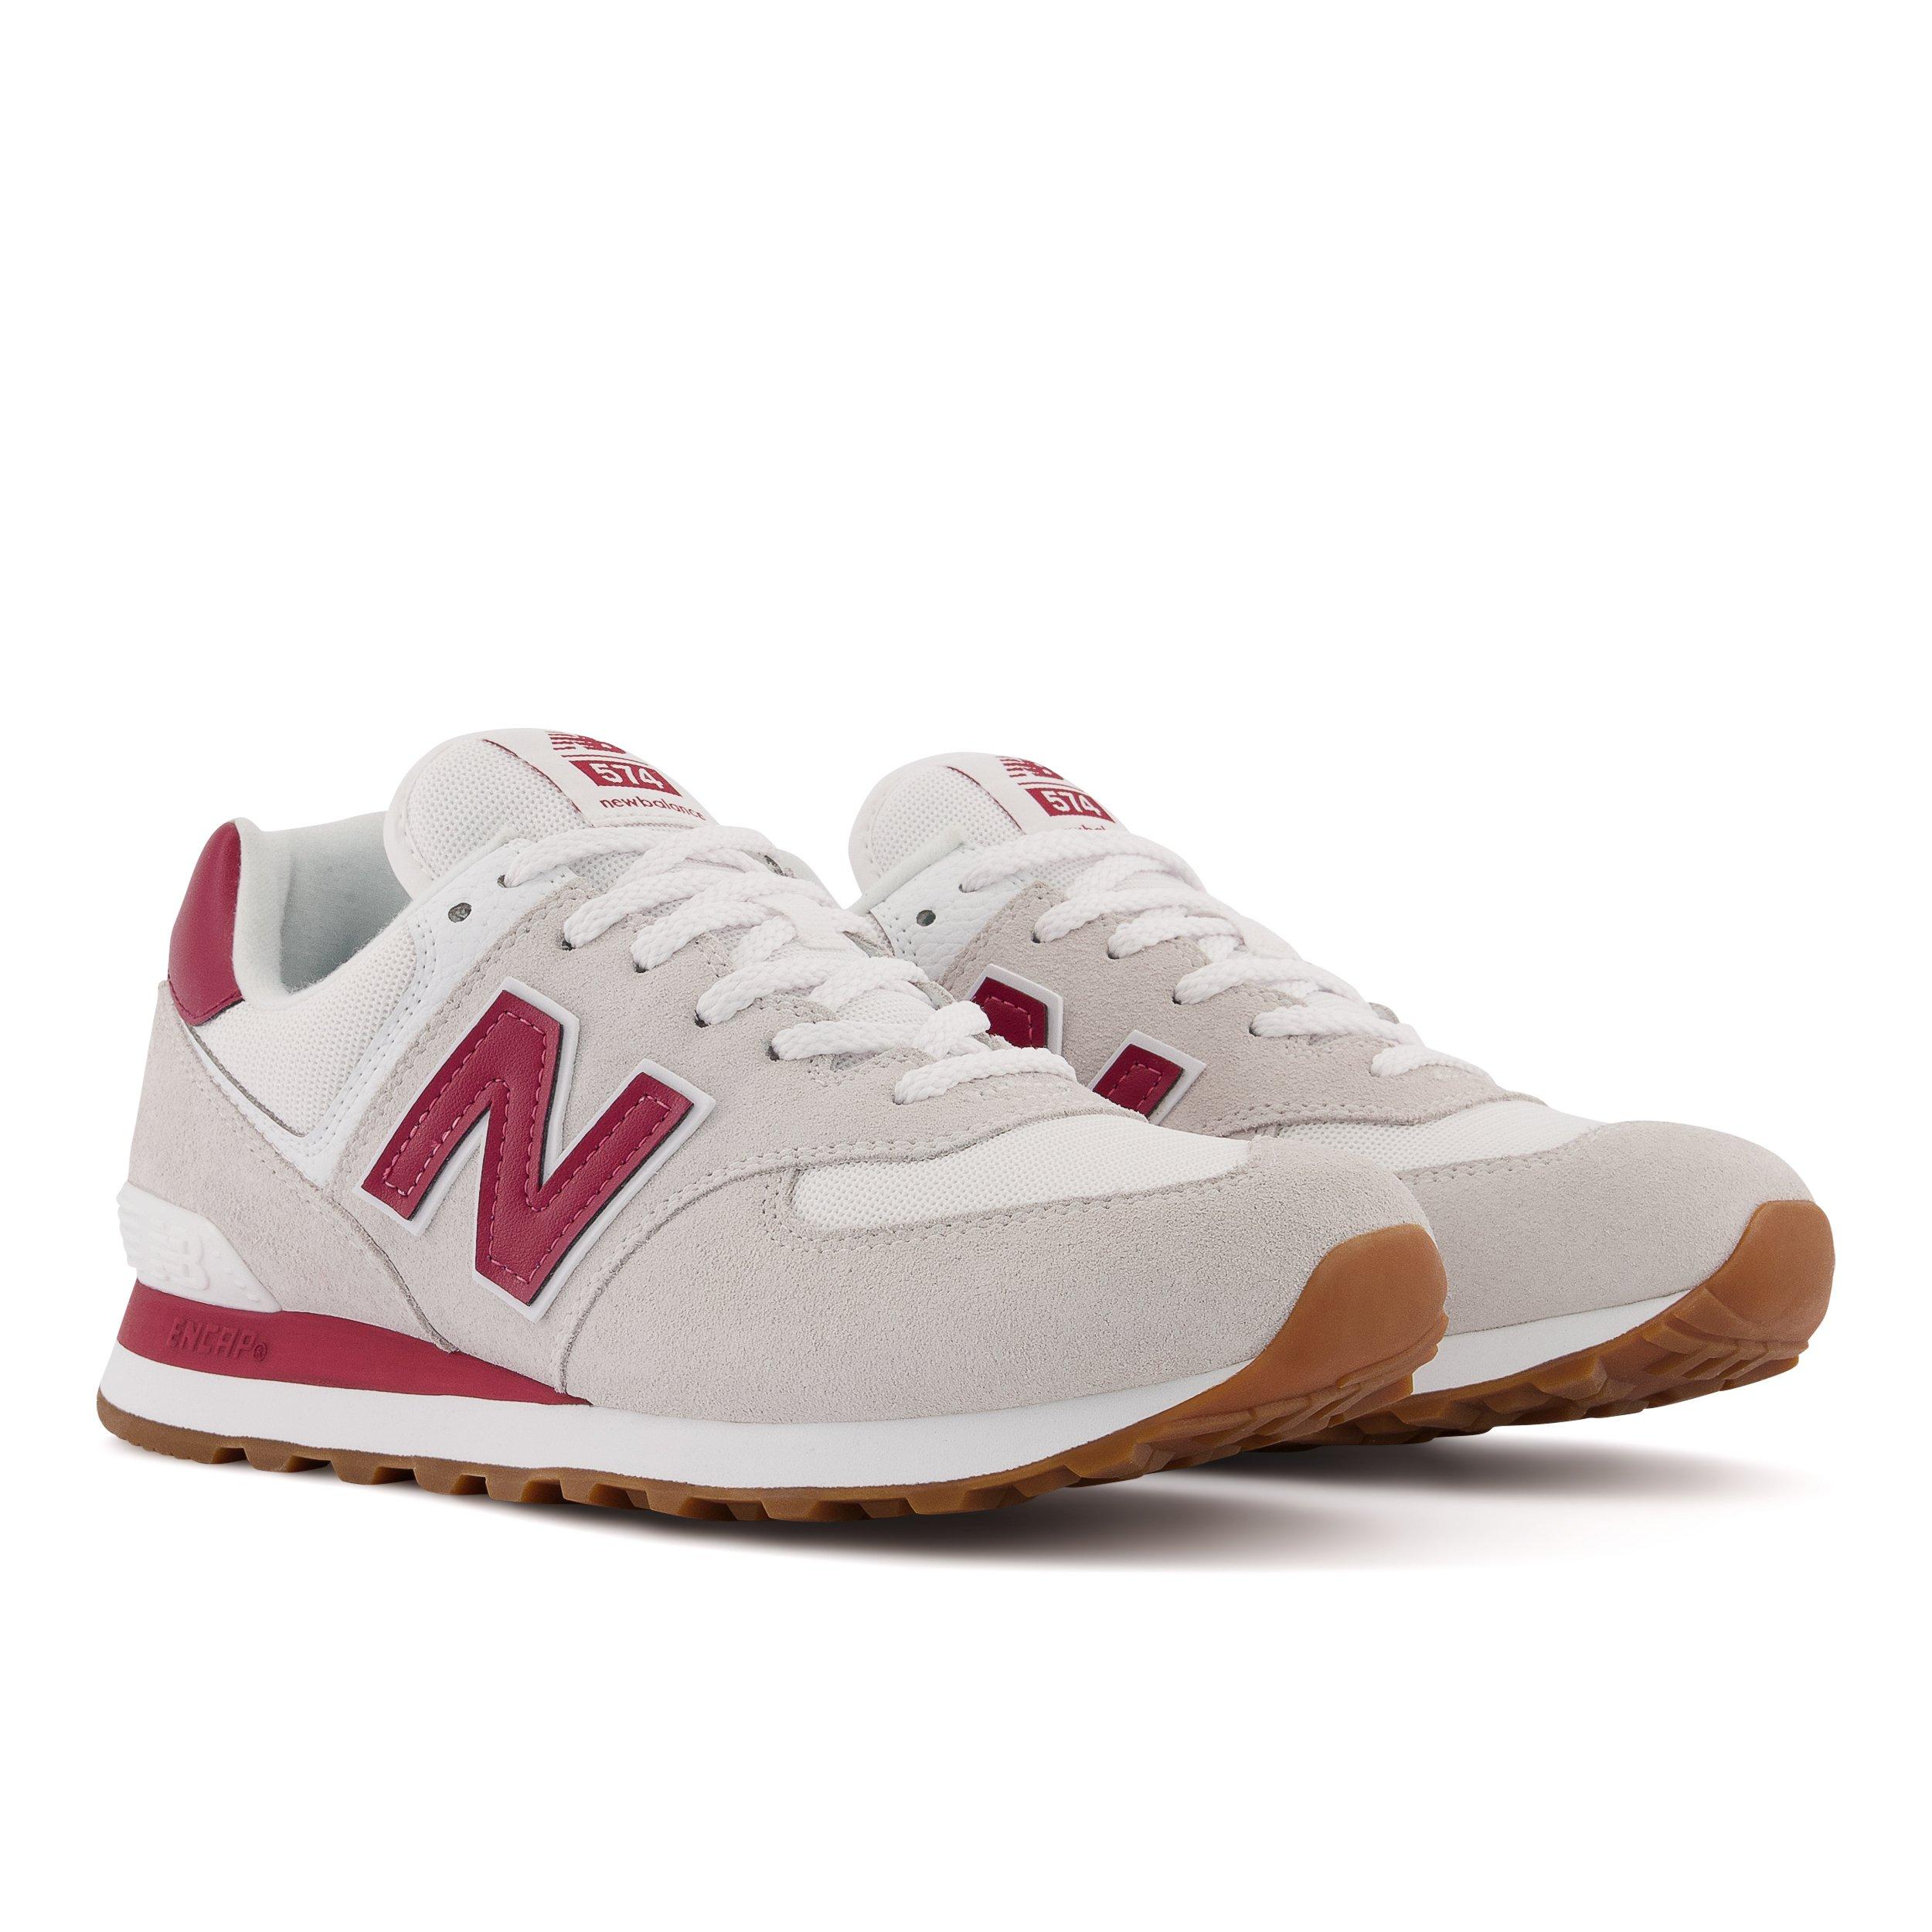 waterfall Orient sacred new balance 574 white Confession Shah friction